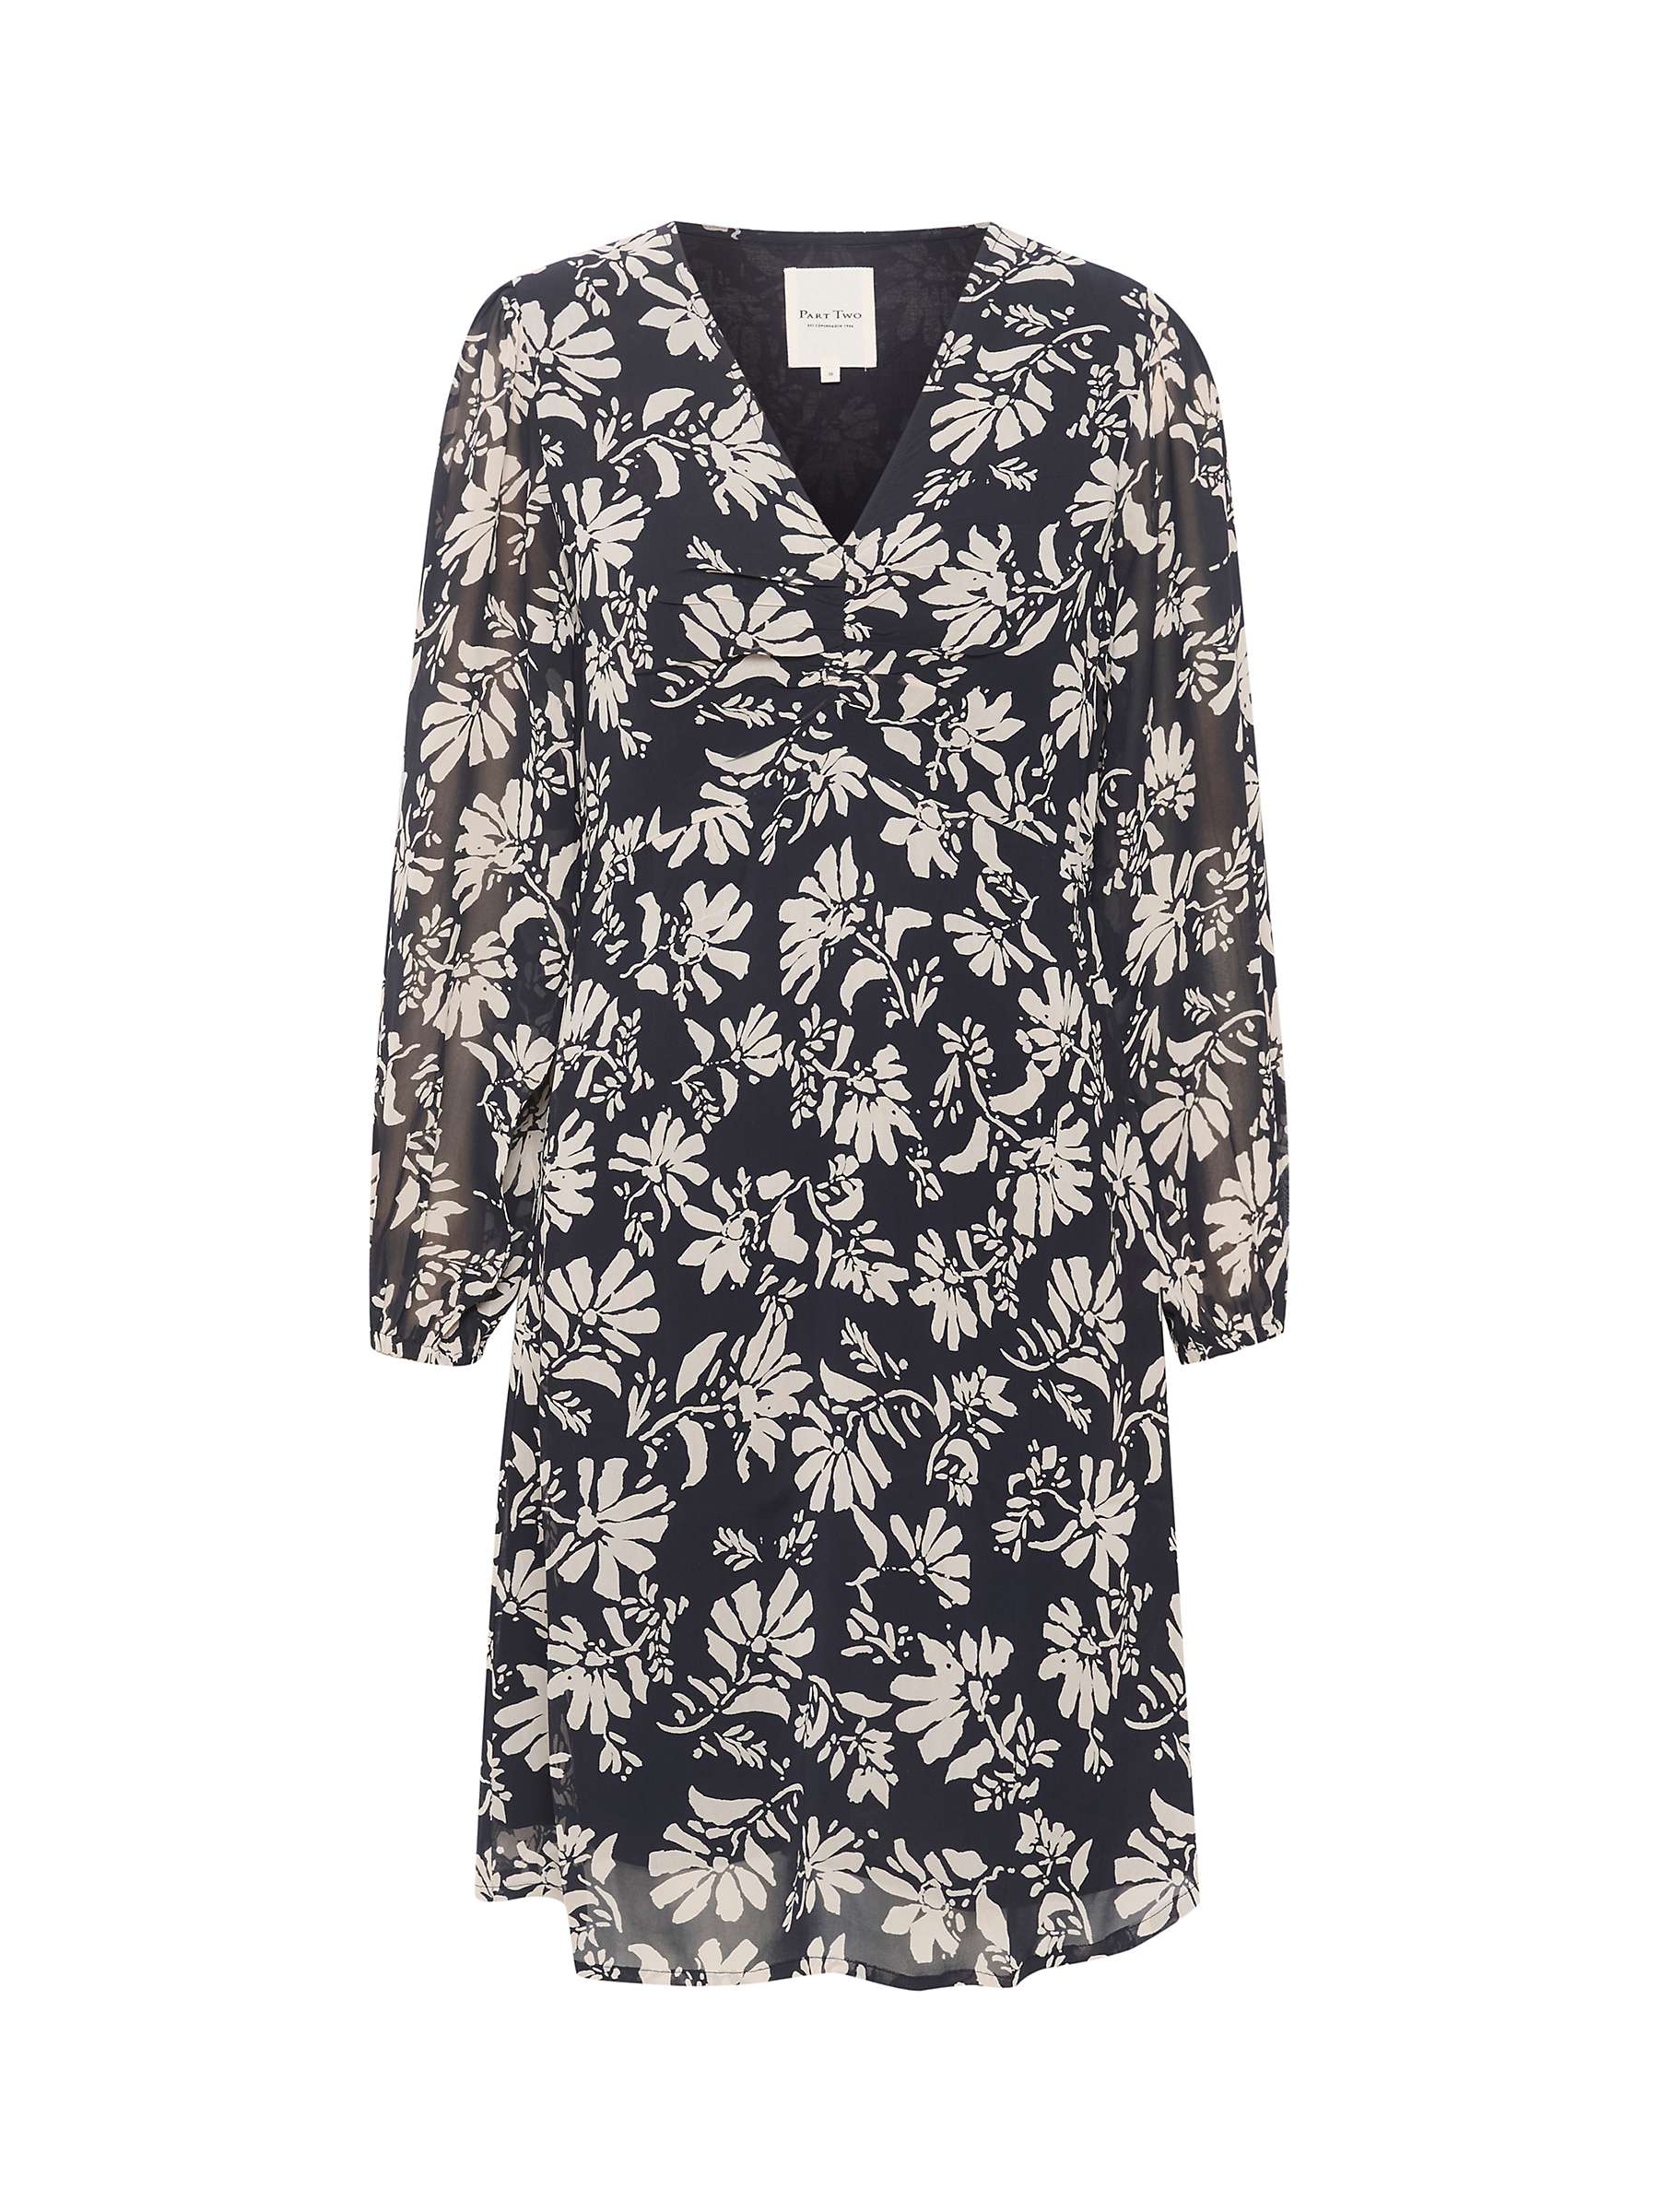 Buy Part Two Fionia Floral Chiffon Dress, Dark Navy Online at johnlewis.com